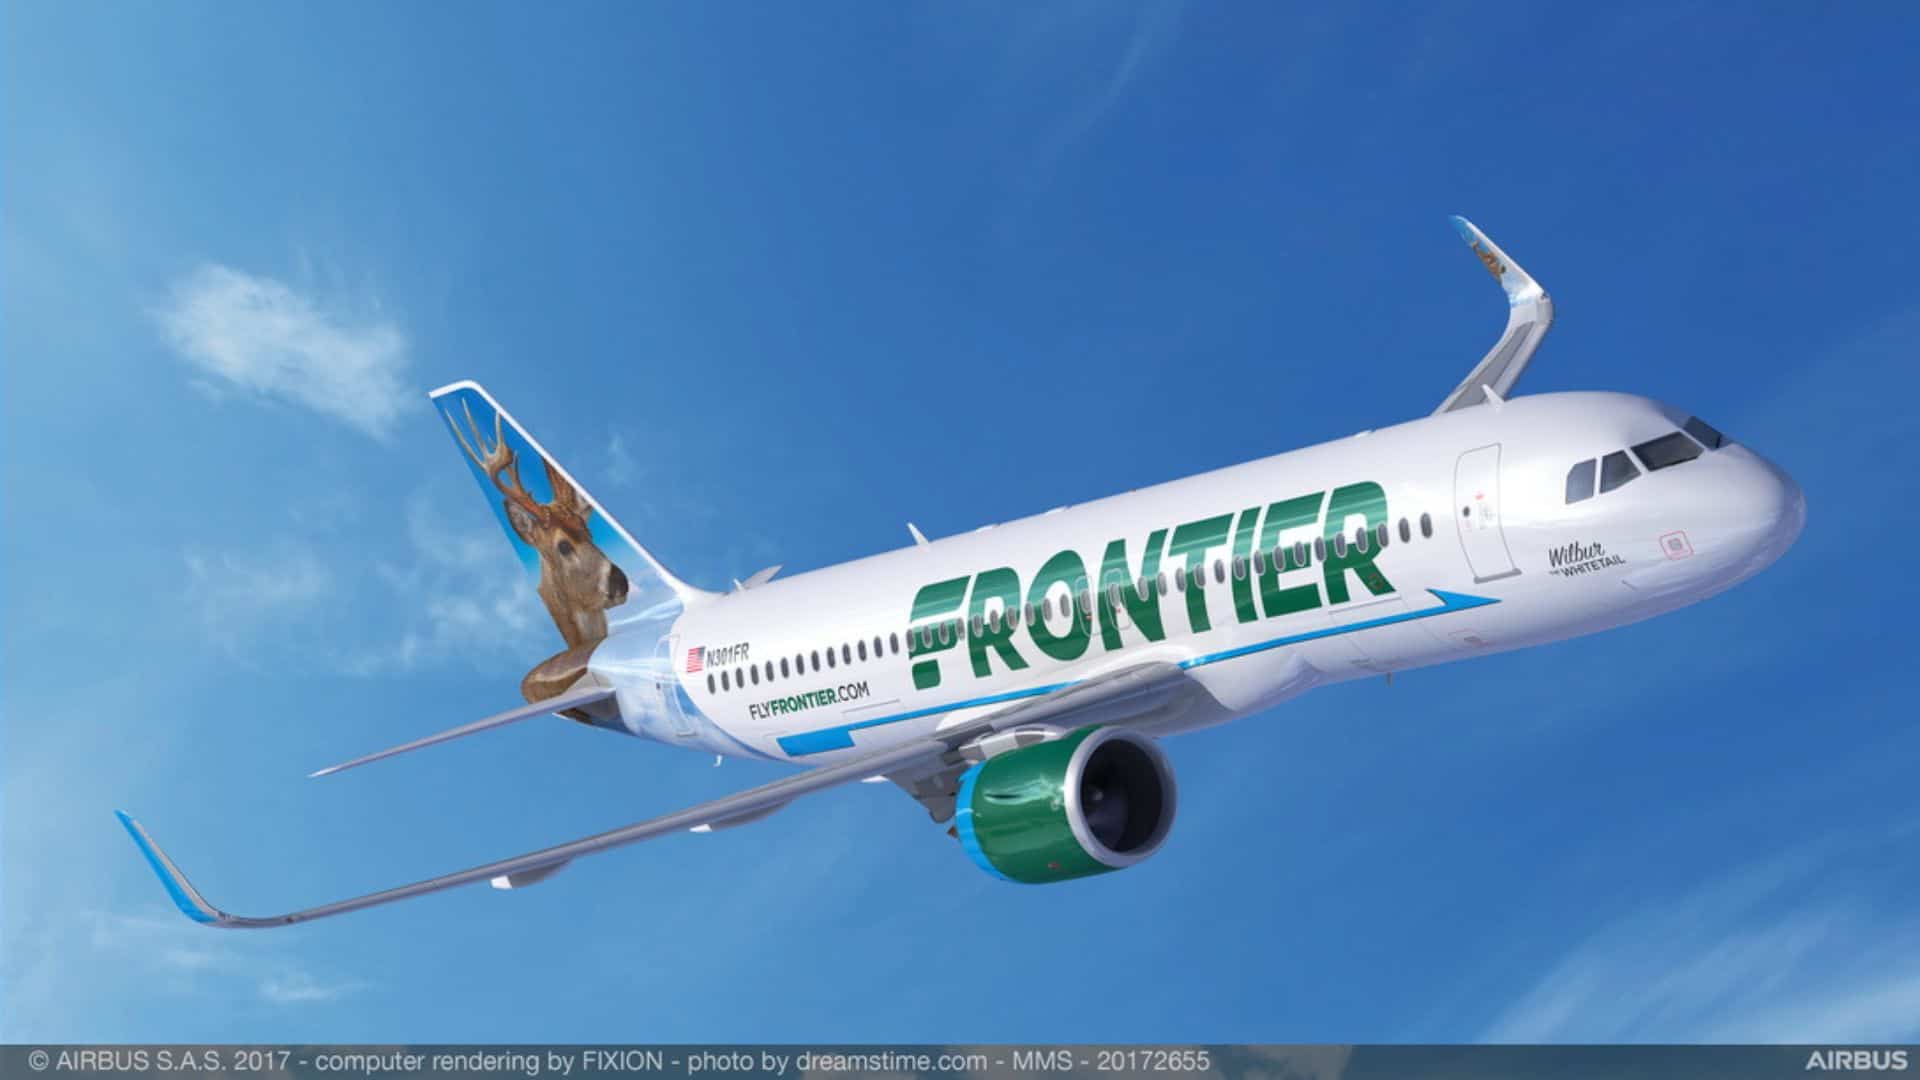 Is There Wifi On Frontier Airlines?